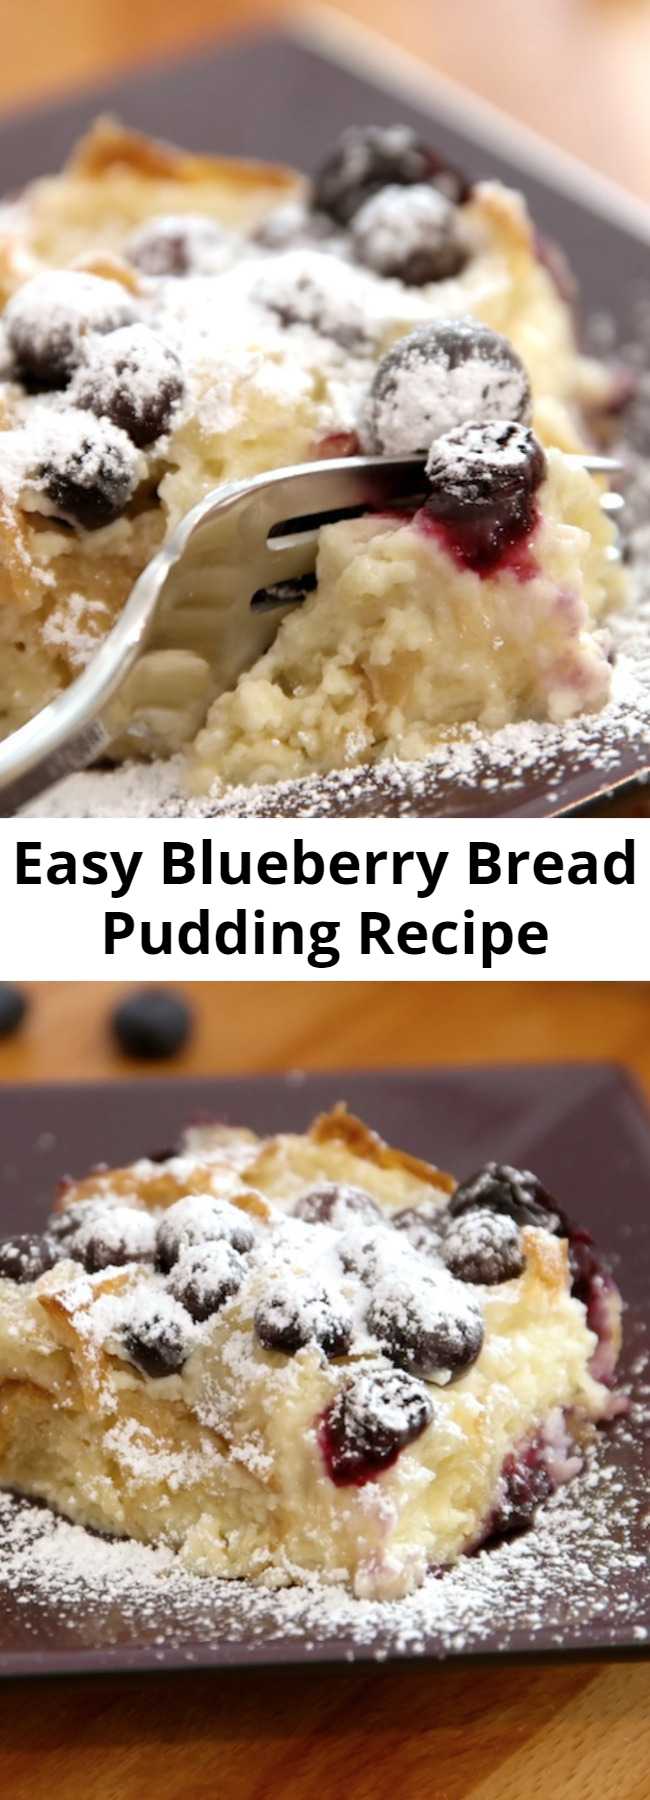 Easy Blueberry Bread Pudding Recipe - Blueberry Bread Pudding is dreamy comfort food that’s so attractive and surprisingly simple to make with only 10 minutes of prep. Serve this bread pudding recipe warm out of the oven for a breakfast, brunch or dessert the whole family will love.